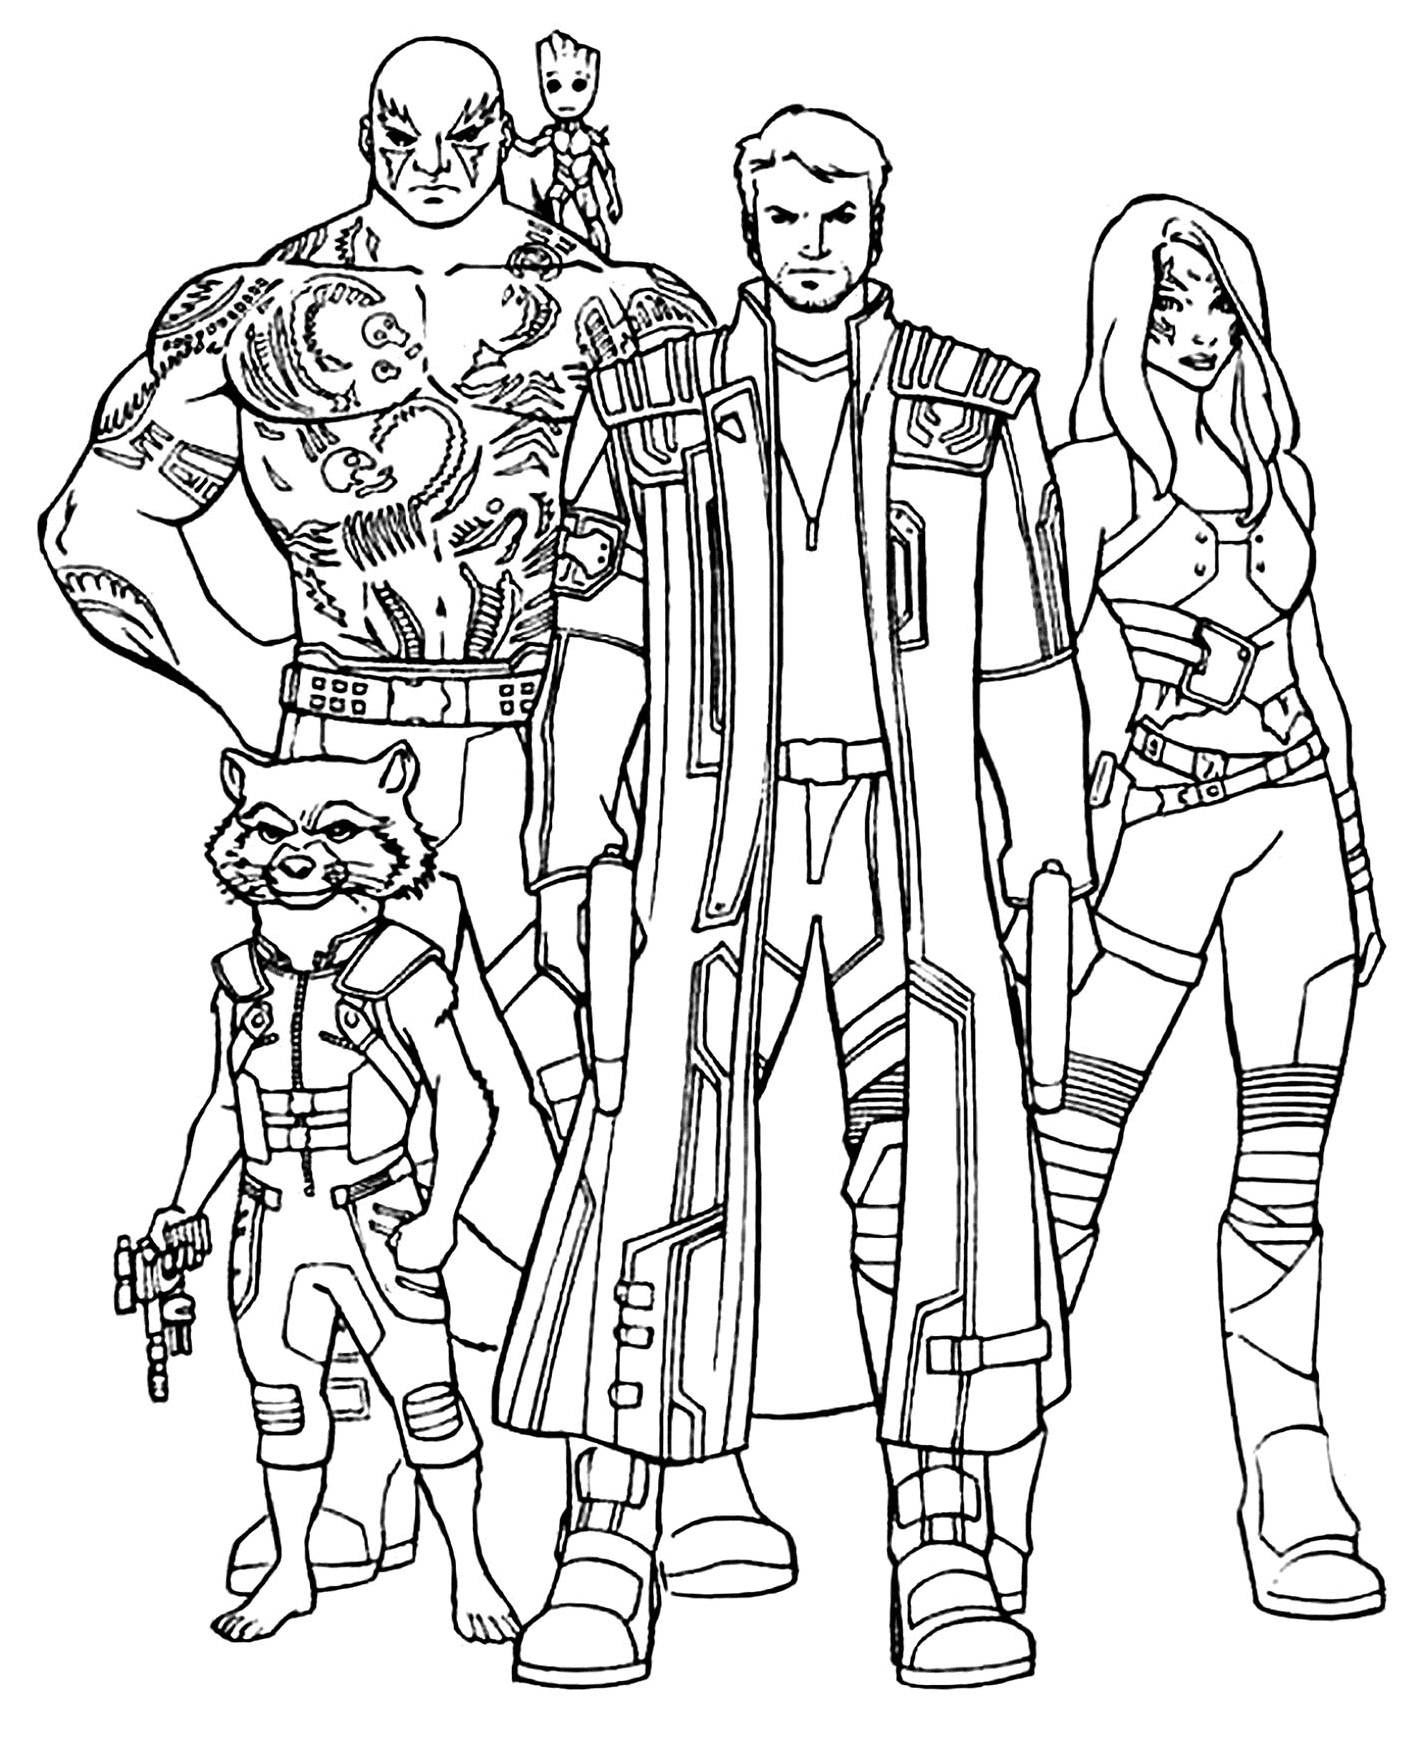 Groot, Rocket Raccoon, Star-Lord, Drax and Gamora Coloring Pages